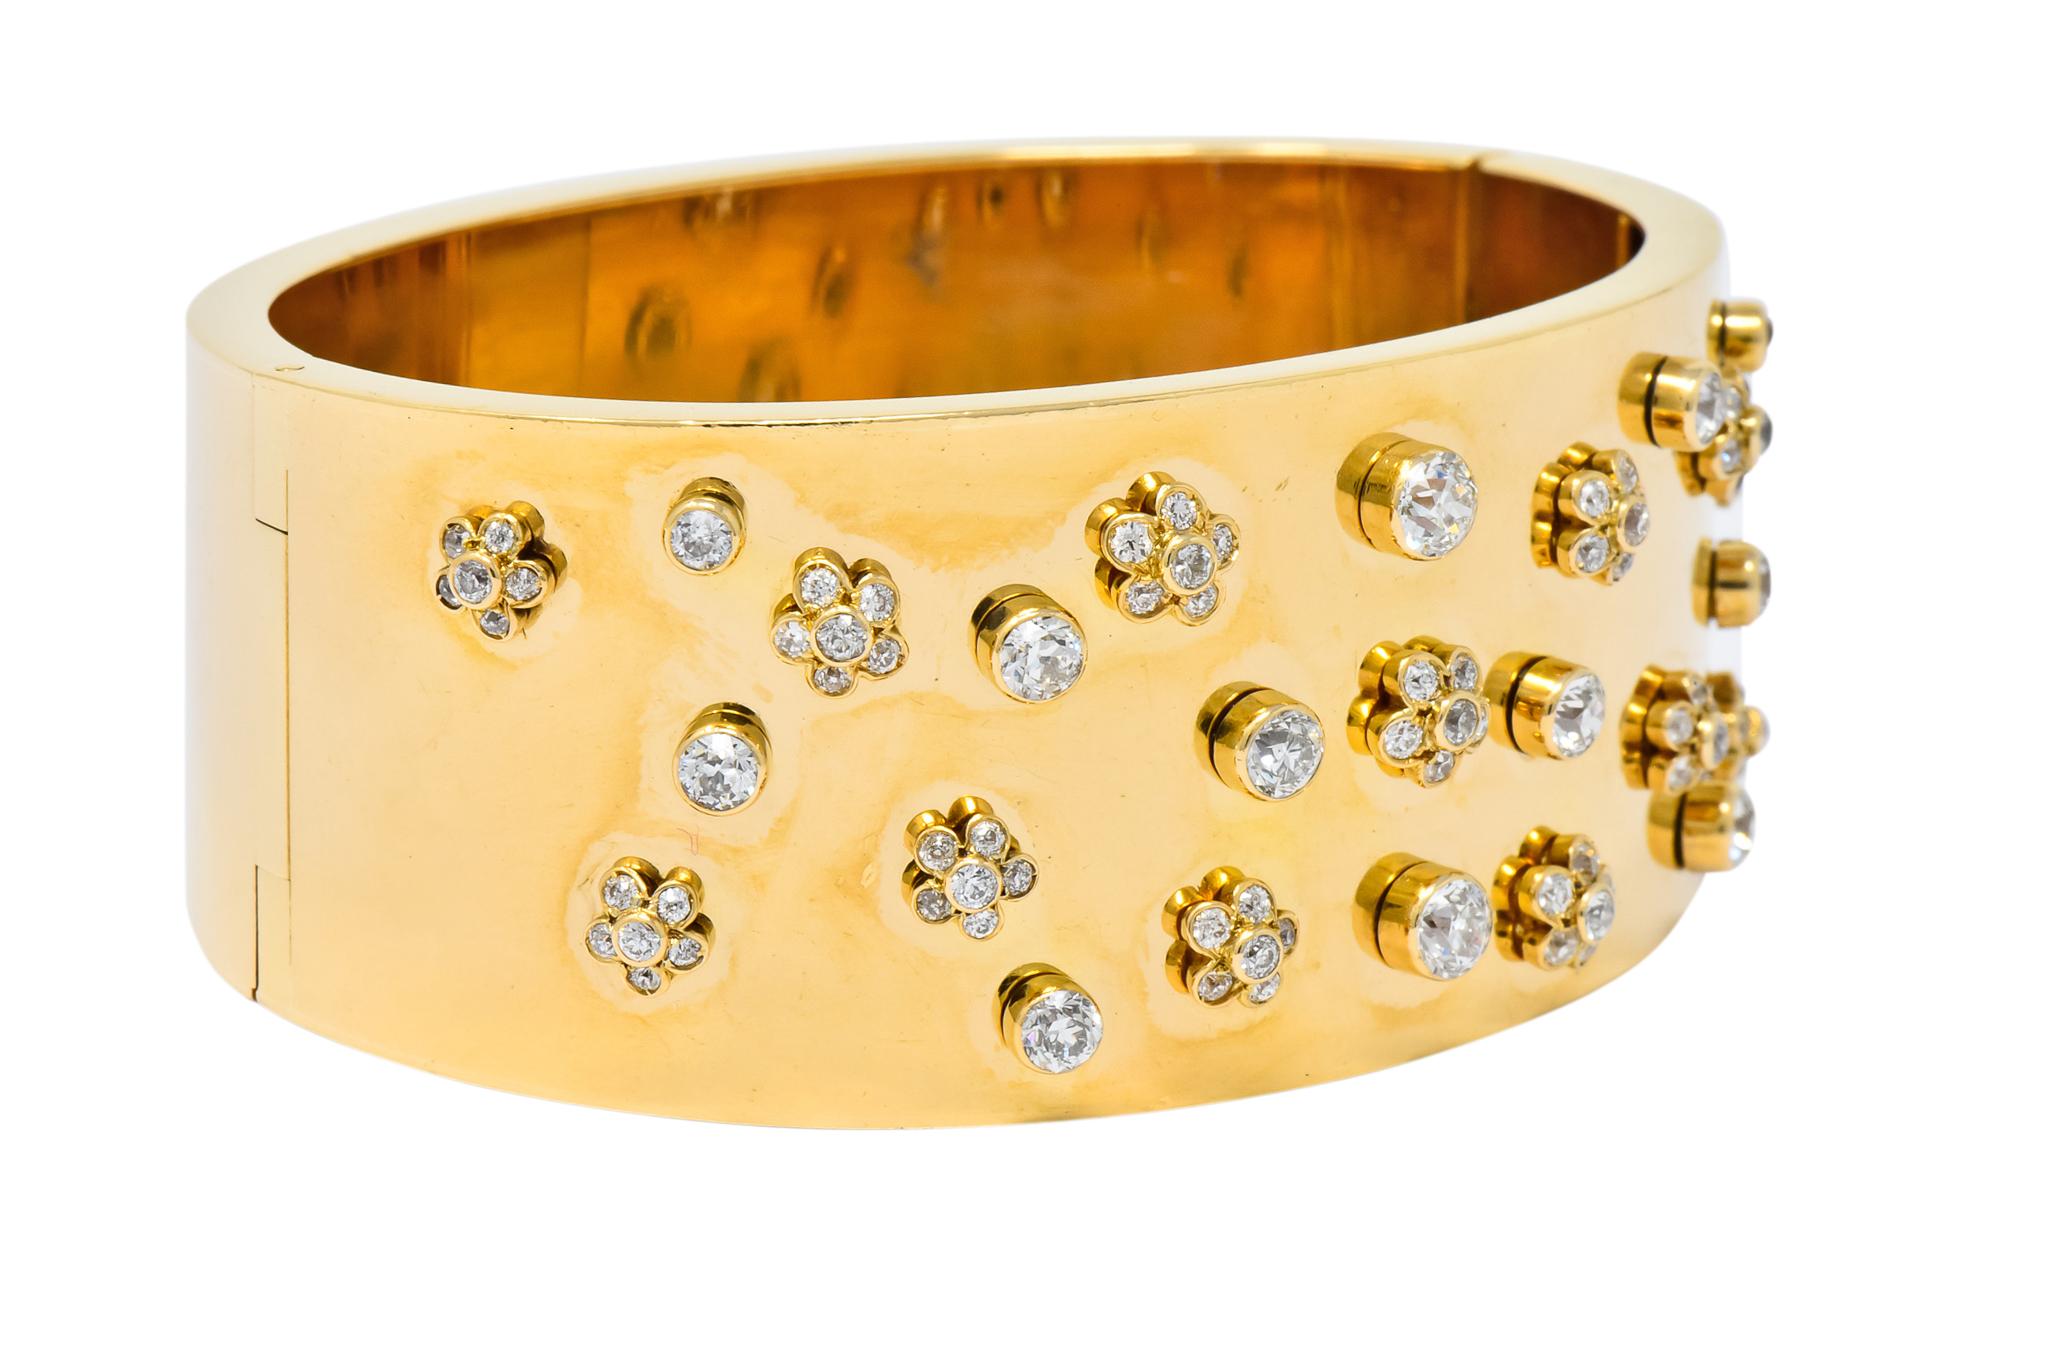 Wide bangle style gold bracelet with a high polished finish

Set to front with old European cut diamonds weighing approximately 2.28 carats total, H/I color and VS clarity

Bezel set in floral motifs with single stone accents

Completed by concealed